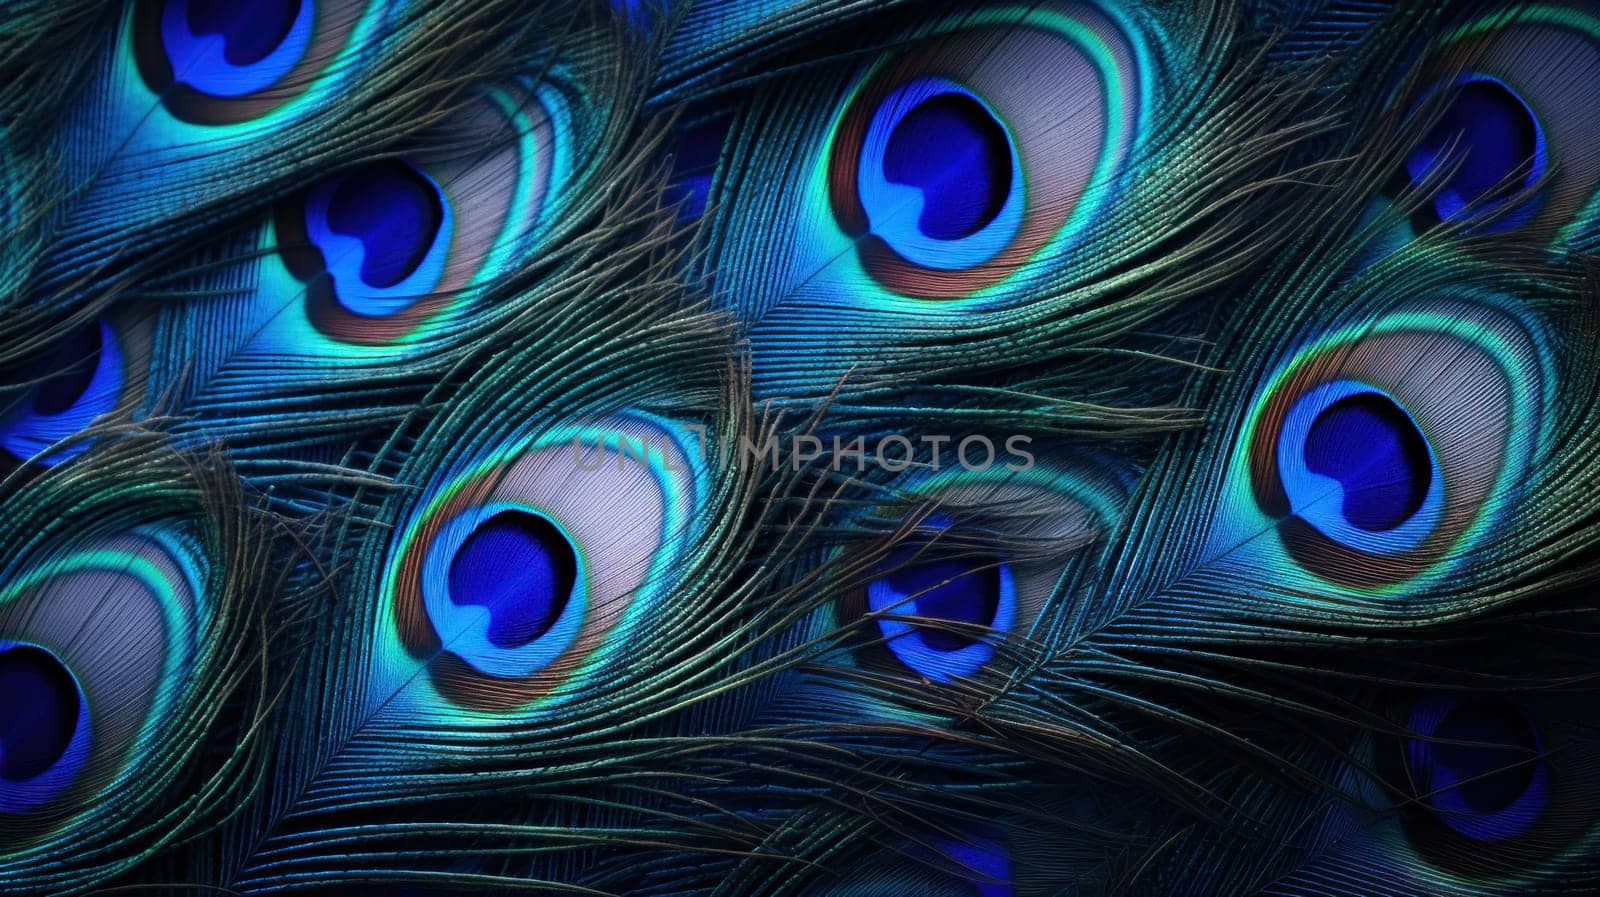 A close up of a large group of blue and green feathers